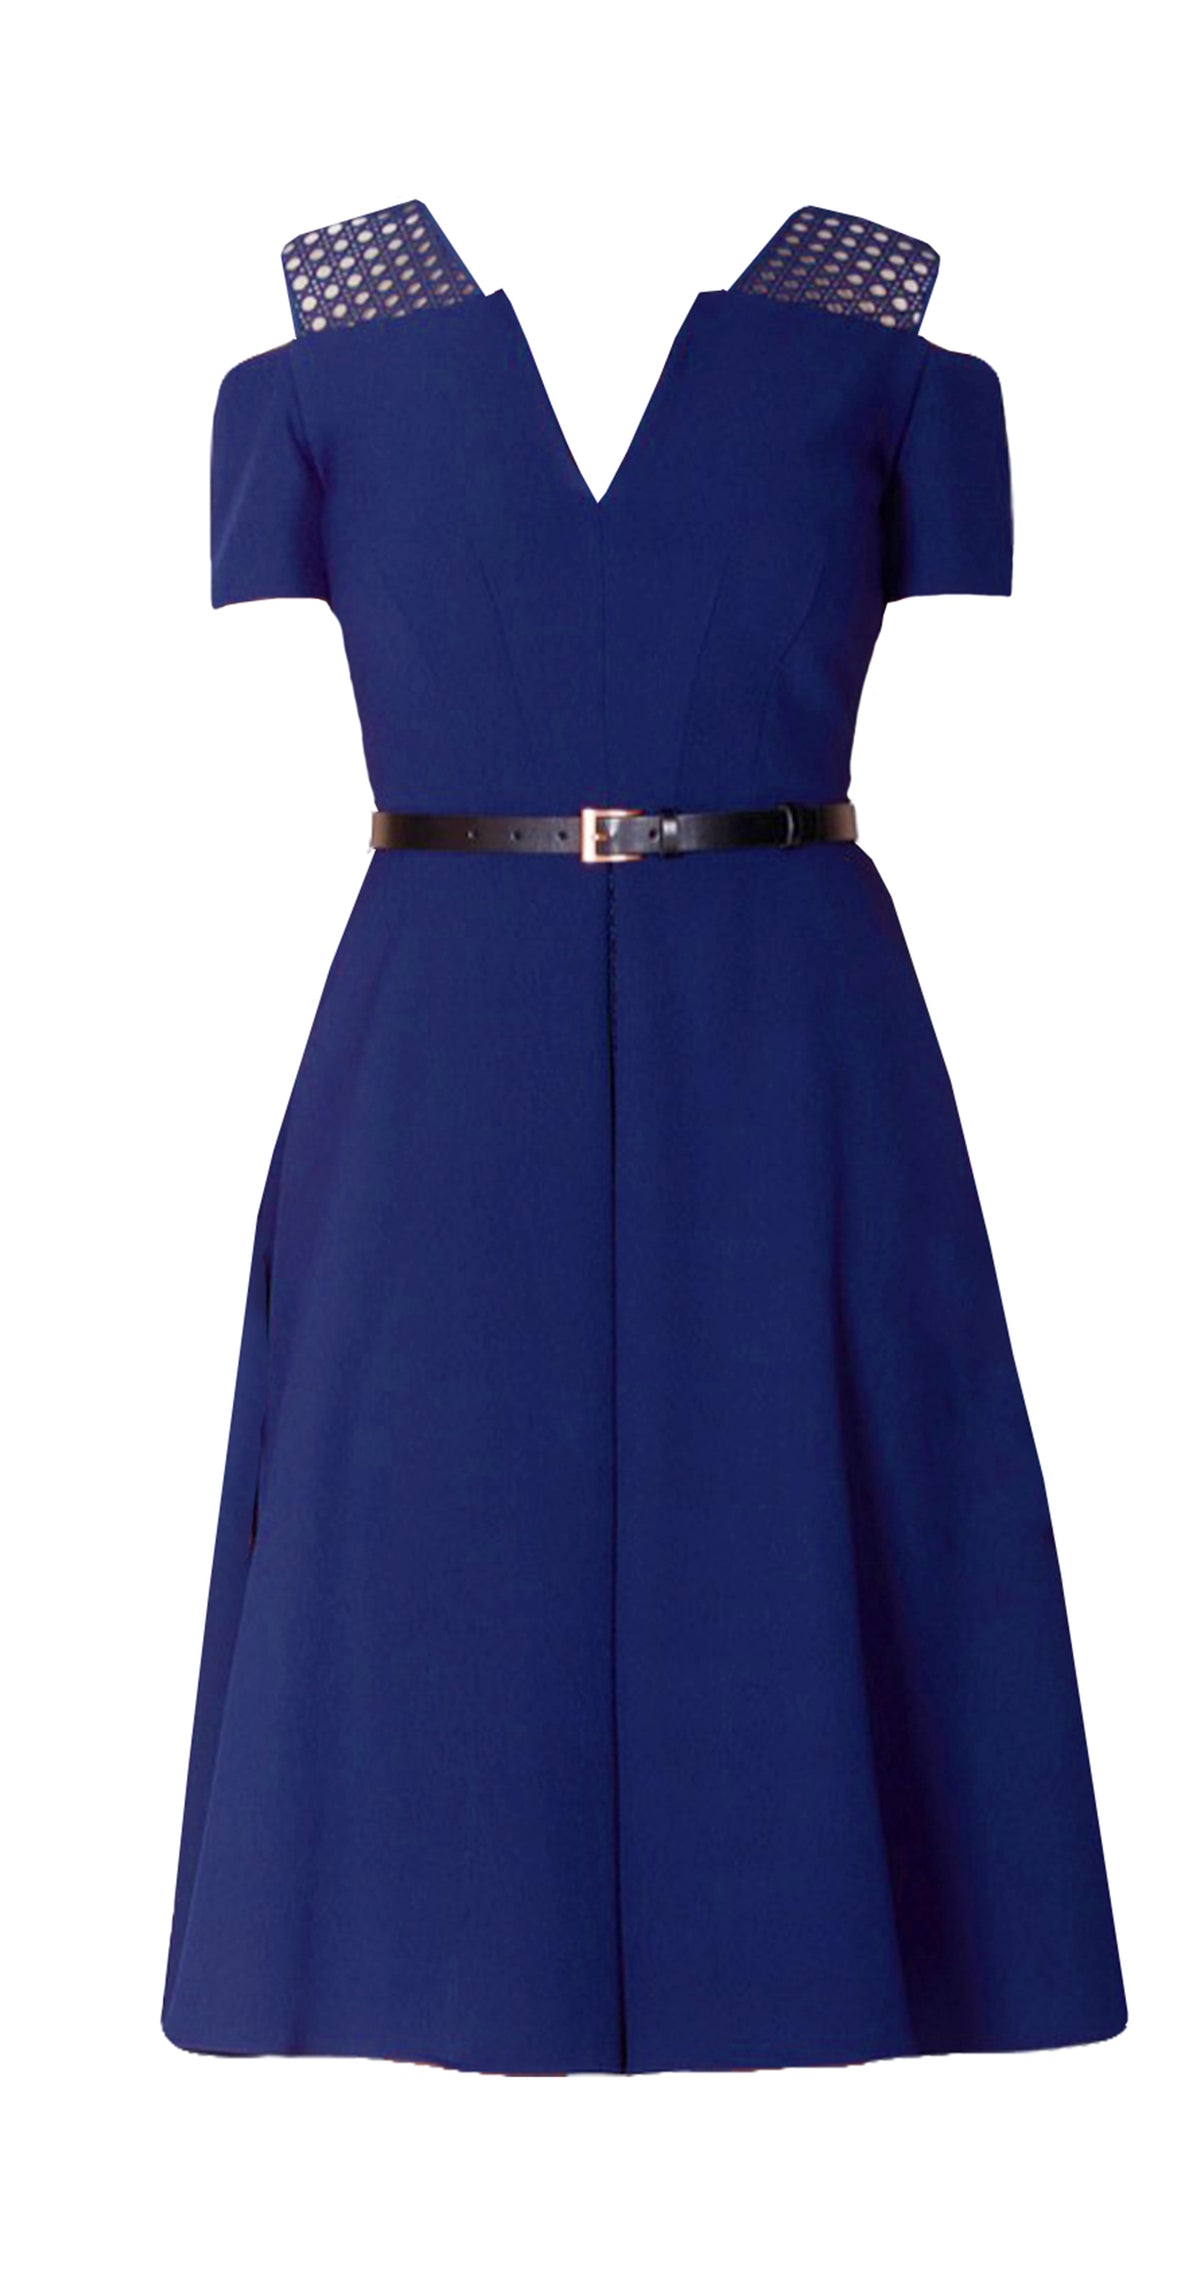 Iviron Dress DRC223 Navy/Lace Contrast With Belt